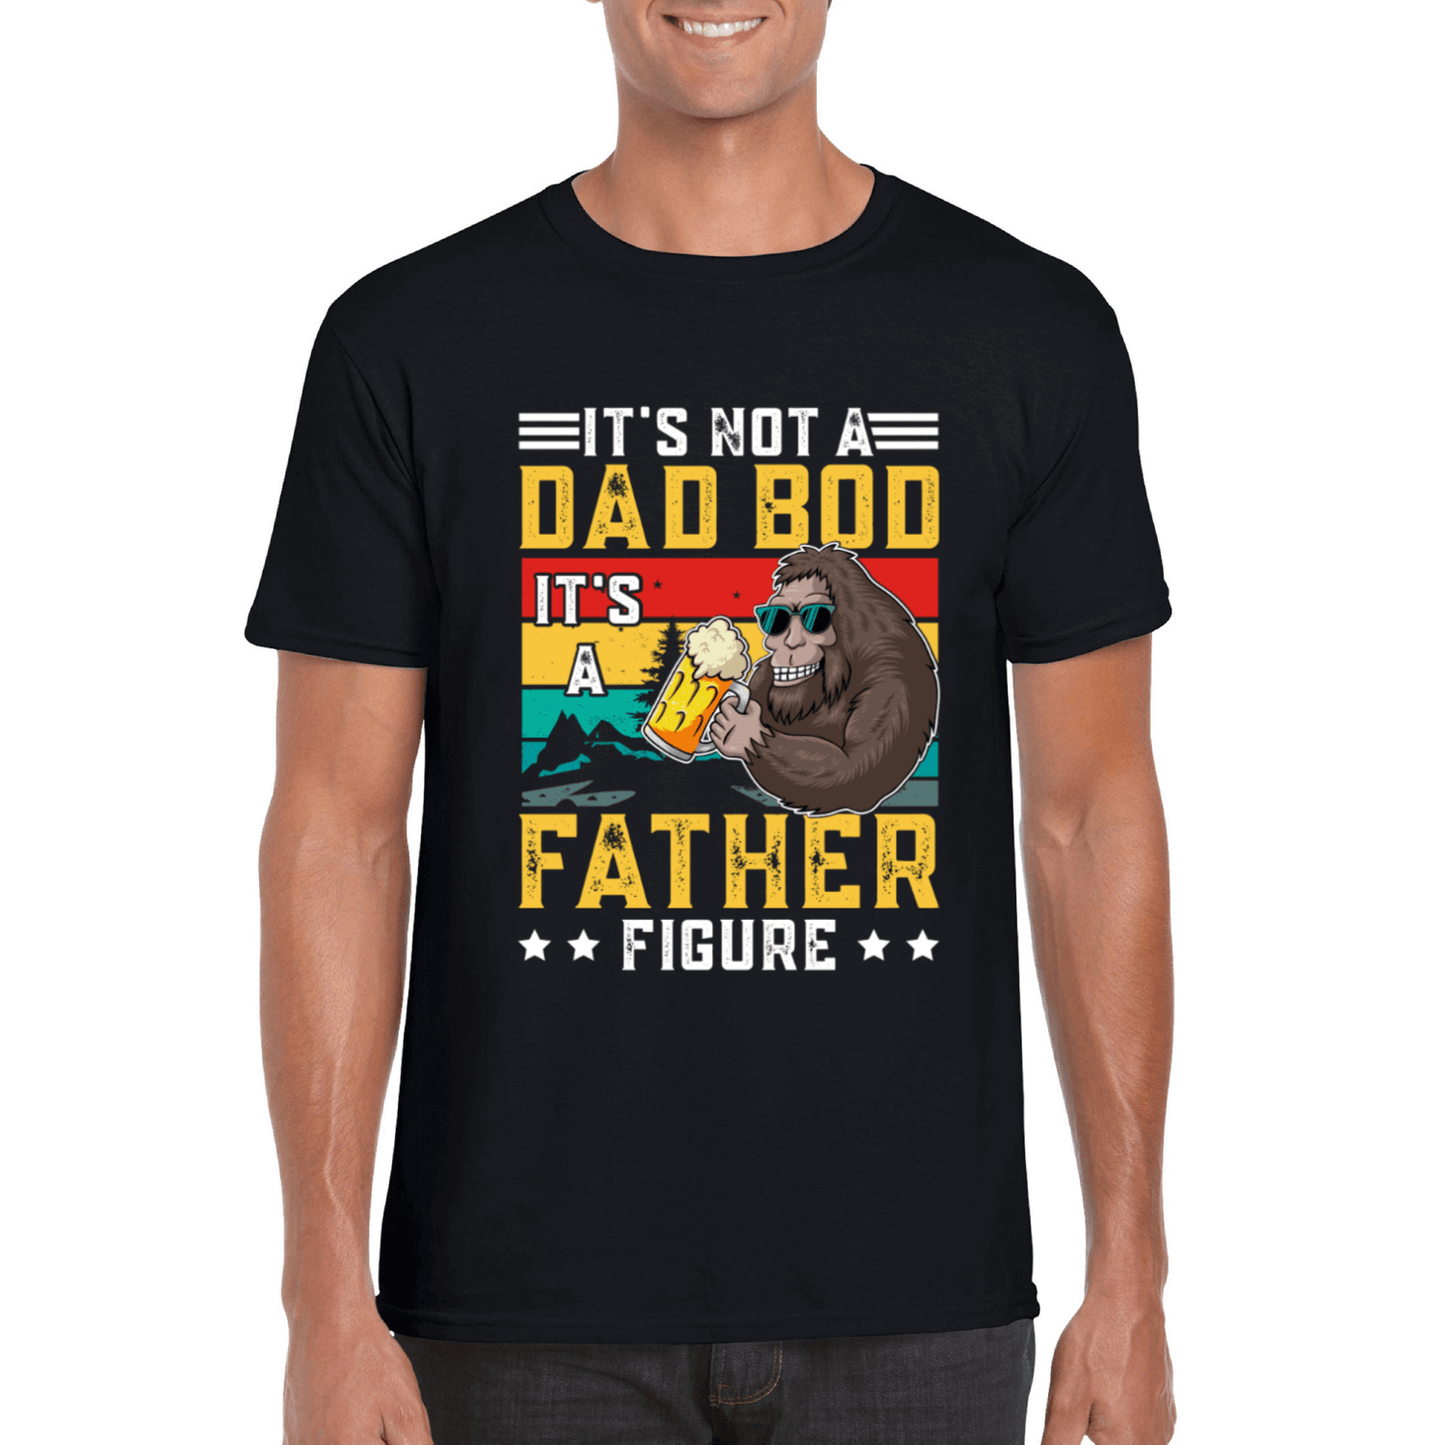 Funny Father's Day T-shirt - It's Not A Dad Bod, It's A Father Figure